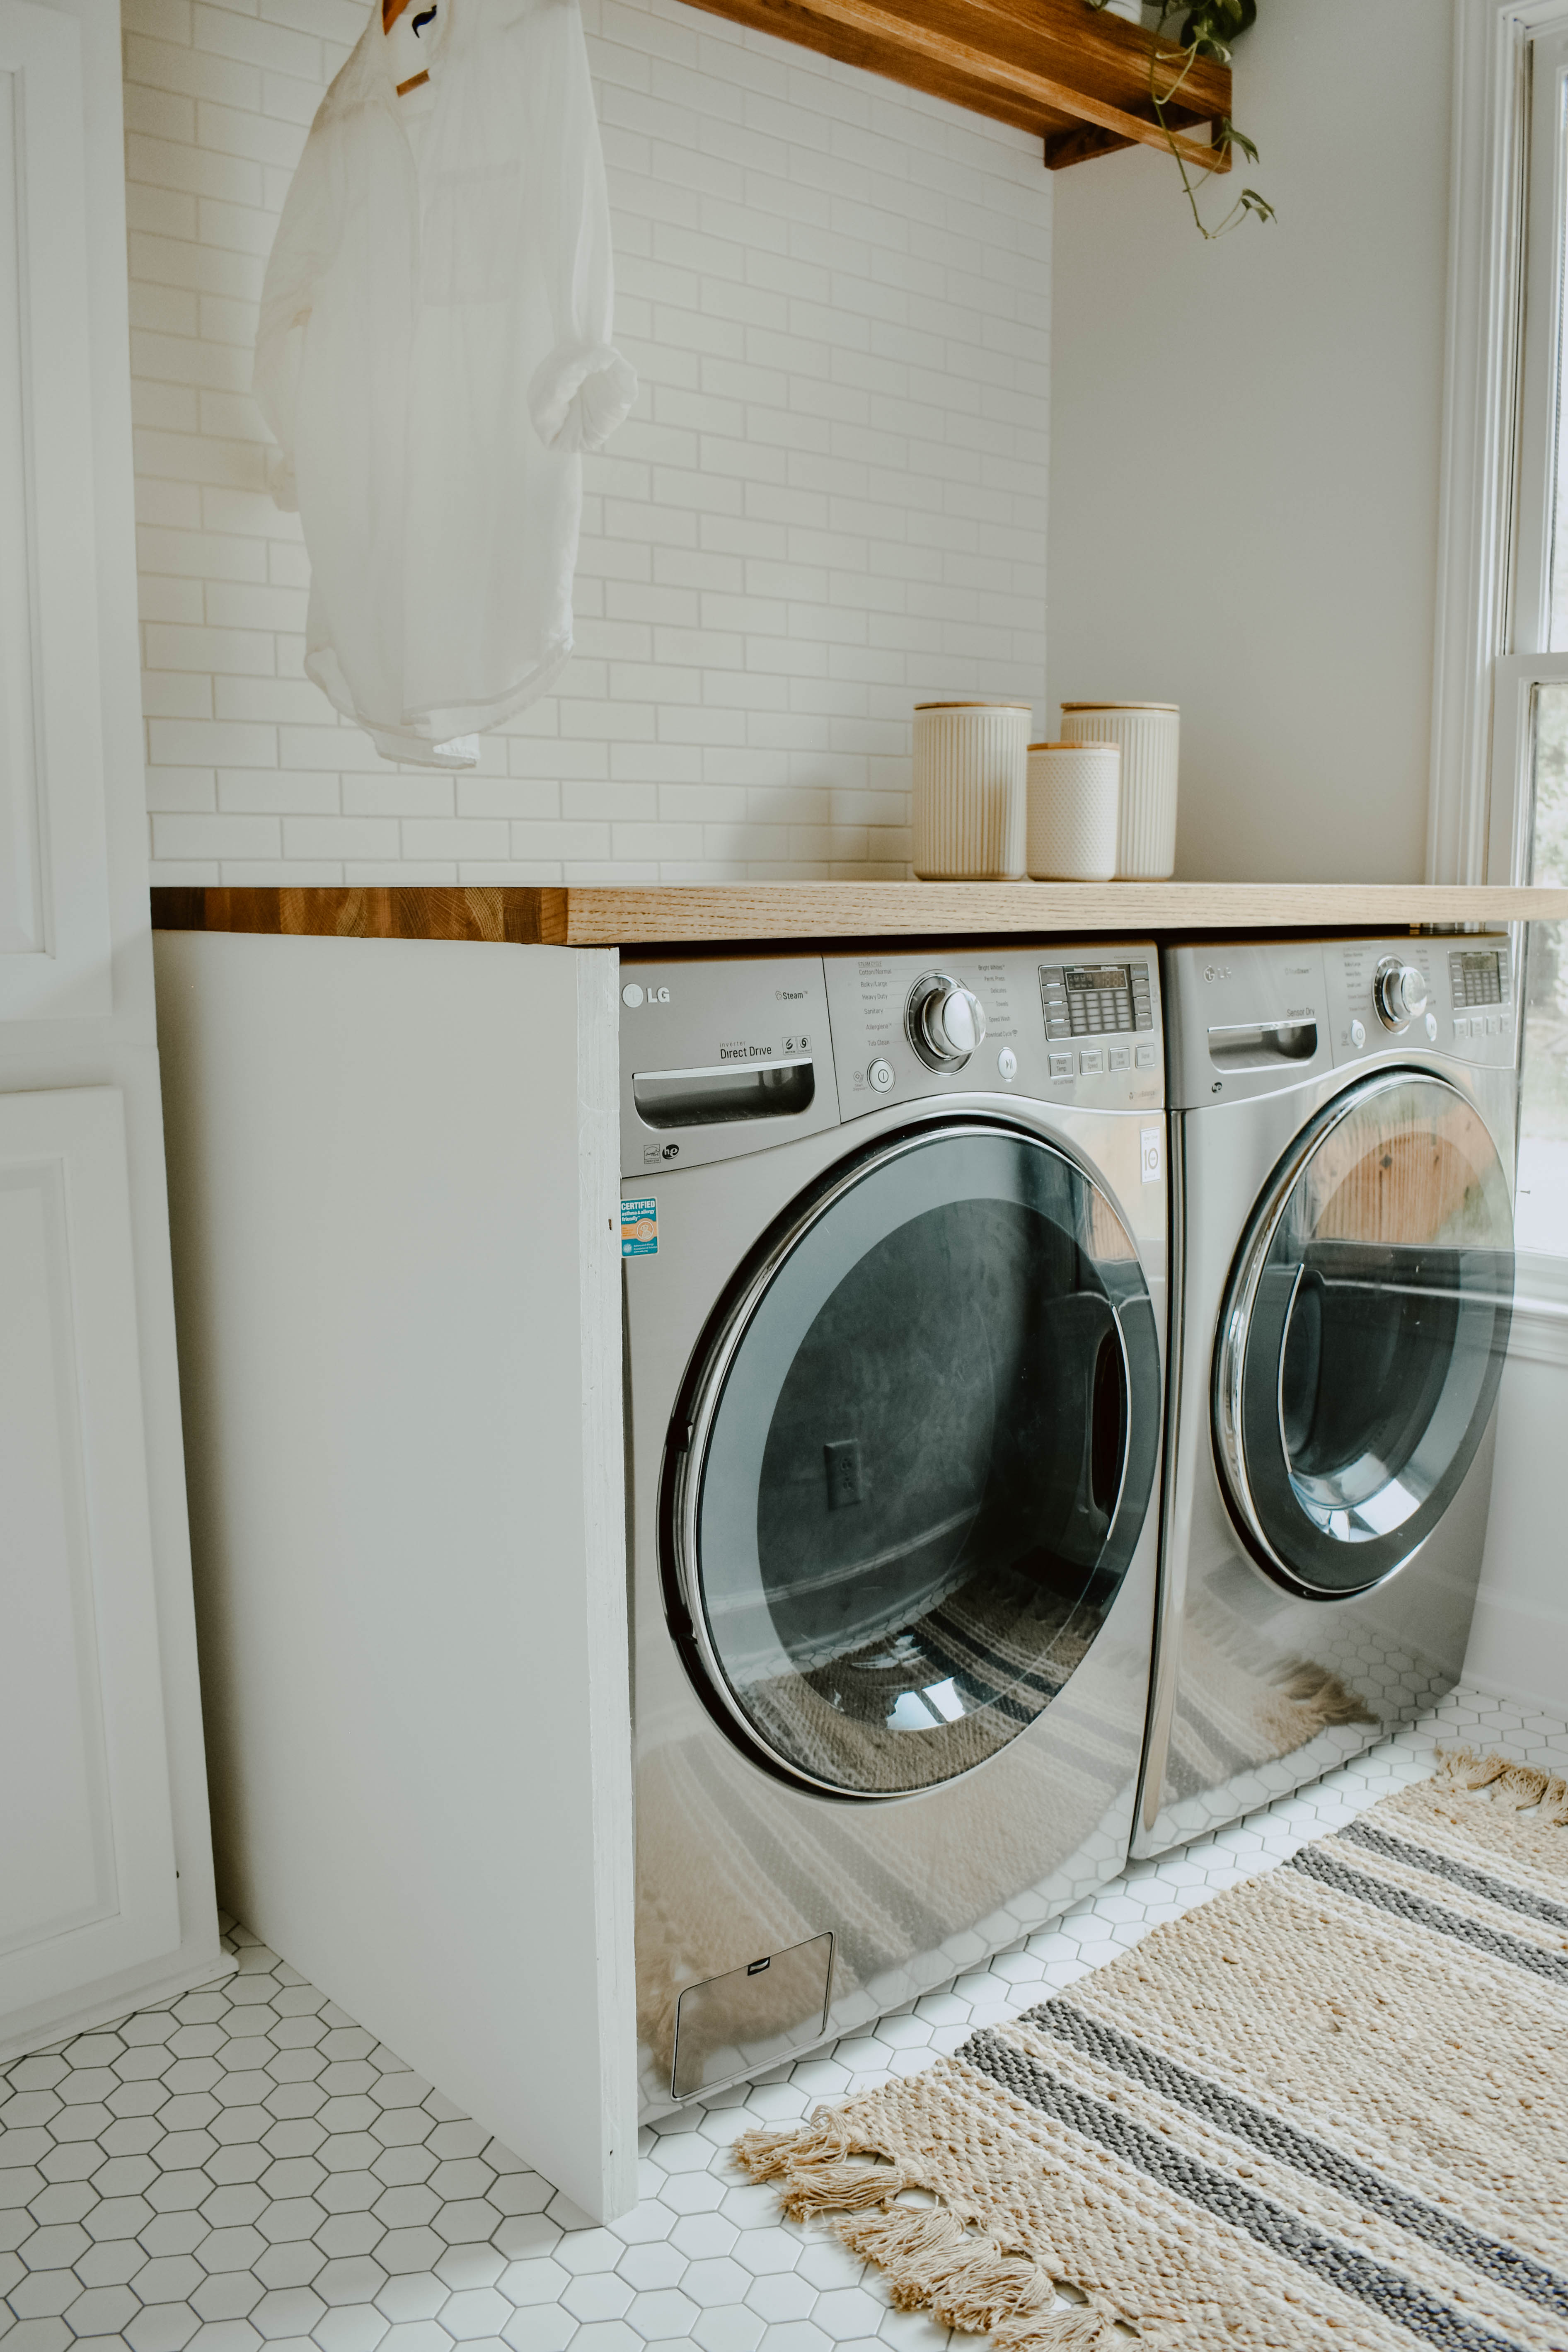 How To Build A Laundry Room Countertop, Washer Dryer Countertop